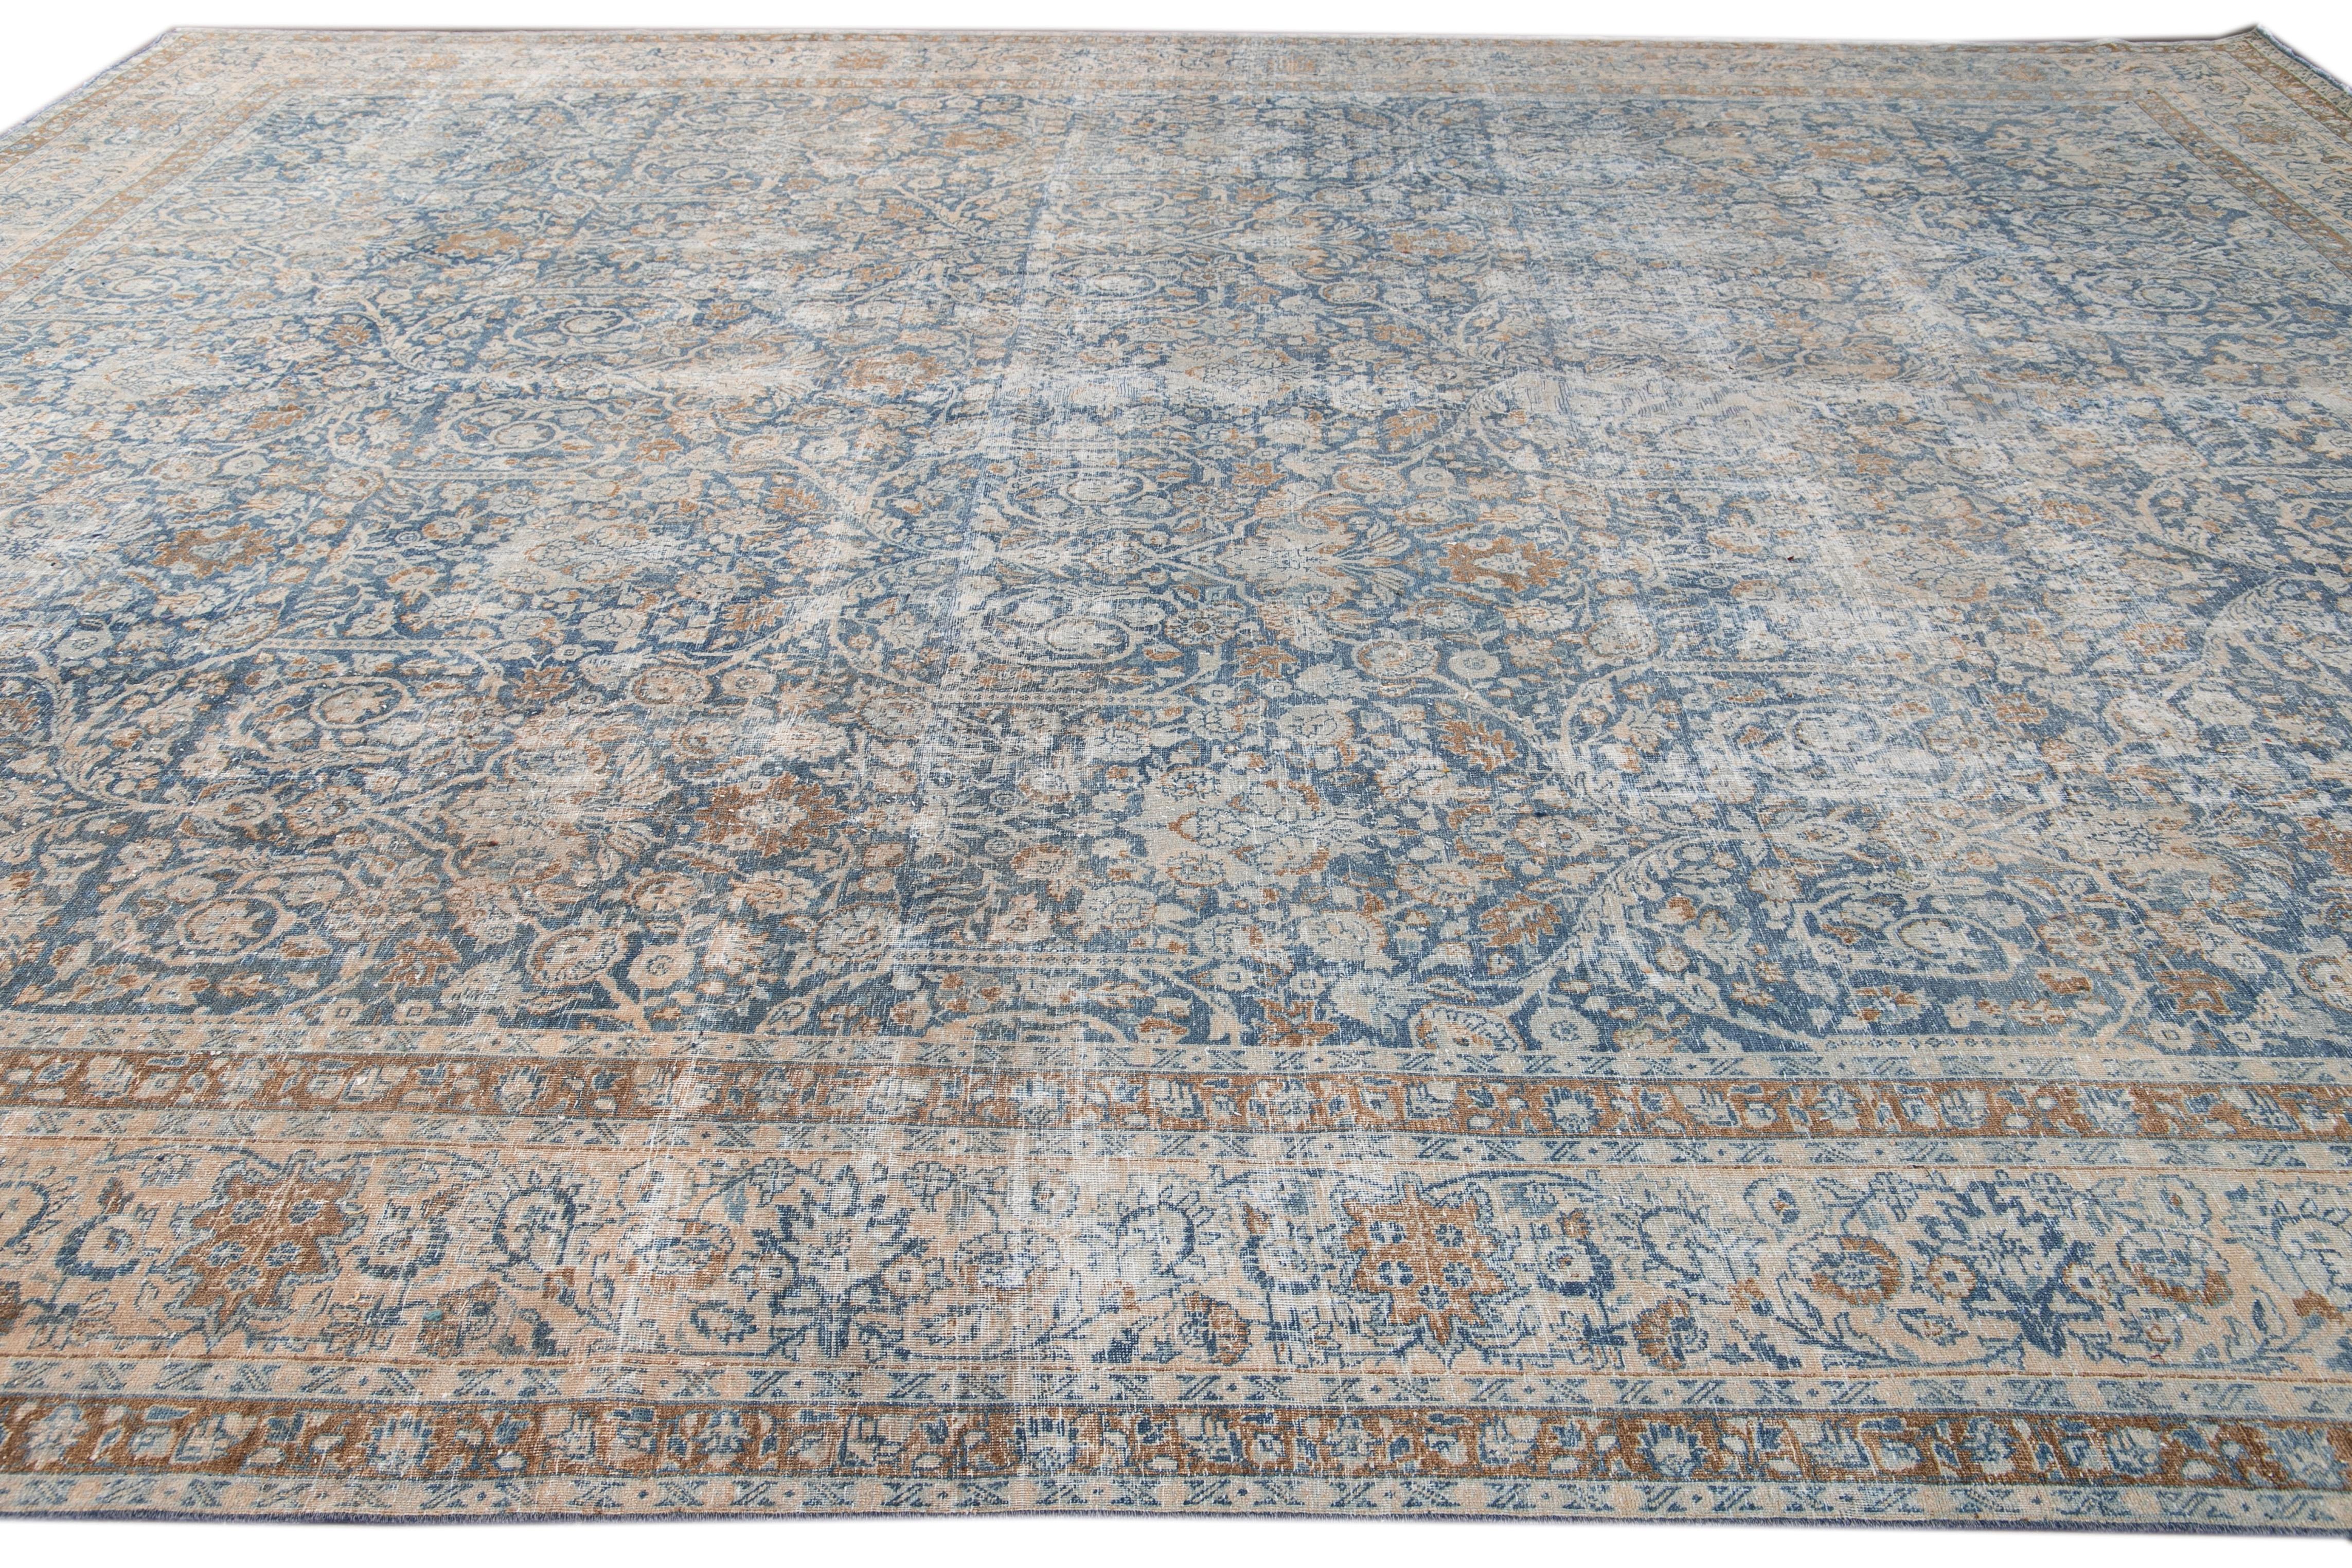 Antique Shabby Chic Blue Tabriz Handmade Oversize Wool Rug In Distressed Condition For Sale In Norwalk, CT